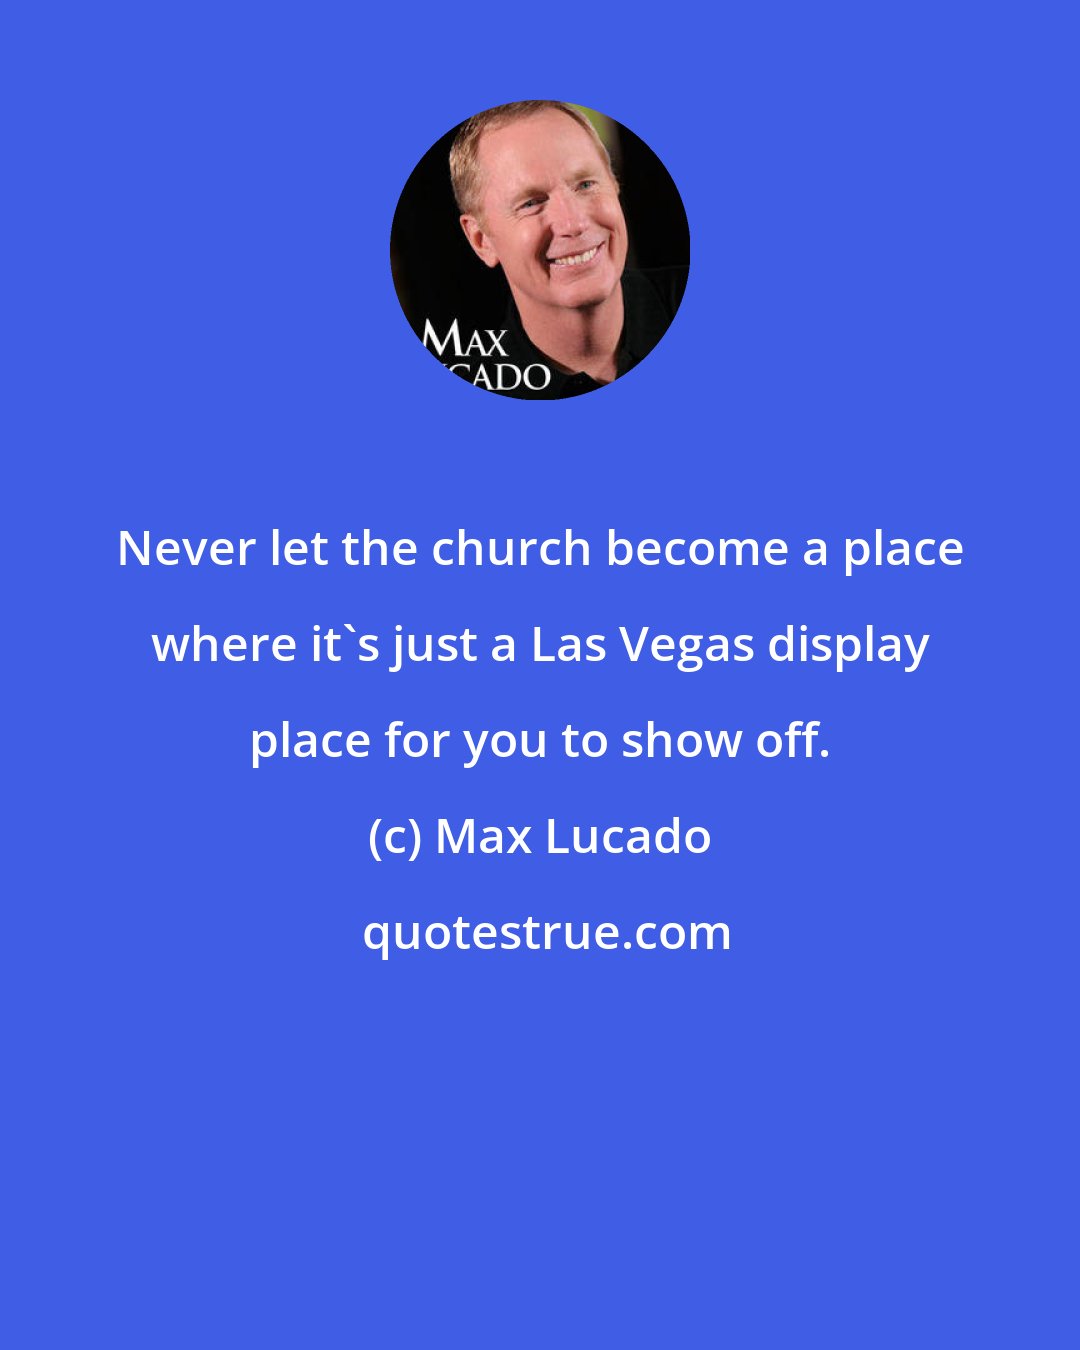 Max Lucado: Never let the church become a place where it's just a Las Vegas display place for you to show off.